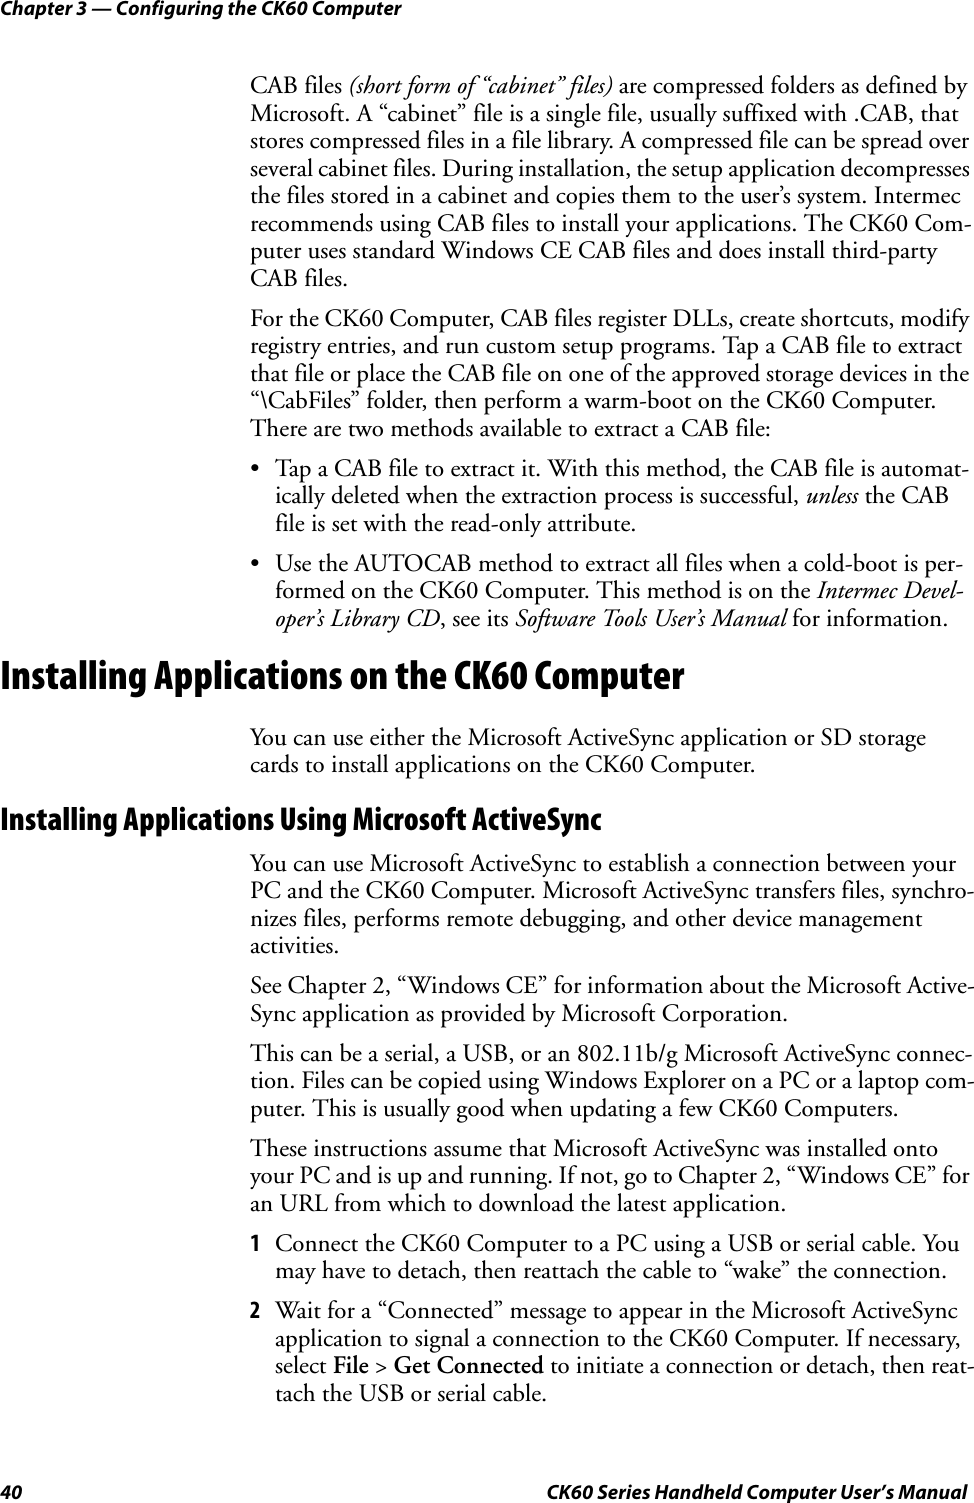 Chapter 3 — Configuring the CK60 Computer40 CK60 Series Handheld Computer User’s ManualCAB files (short form of “cabinet” files) are compressed folders as defined by Microsoft. A “cabinet” file is a single file, usually suffixed with .CAB, that stores compressed files in a file library. A compressed file can be spread over several cabinet files. During installation, the setup application decompresses the files stored in a cabinet and copies them to the user’s system. Intermec recommends using CAB files to install your applications. The CK60 Com-puter uses standard Windows CE CAB files and does install third-party CAB files.For the CK60 Computer, CAB files register DLLs, create shortcuts, modify registry entries, and run custom setup programs. Tap a CAB file to extract that file or place the CAB file on one of the approved storage devices in the “\CabFiles” folder, then perform a warm-boot on the CK60 Computer. There are two methods available to extract a CAB file:• Tap a CAB file to extract it. With this method, the CAB file is automat-ically deleted when the extraction process is successful, unless the CAB file is set with the read-only attribute.• Use the AUTOCAB method to extract all files when a cold-boot is per-formed on the CK60 Computer. This method is on the Intermec Devel-oper’s Library CD, see its Software Tools User’s Manual for information.Installing Applications on the CK60 ComputerYou can use either the Microsoft ActiveSync application or SD storage cards to install applications on the CK60 Computer.Installing Applications Using Microsoft ActiveSyncYou can use Microsoft ActiveSync to establish a connection between your PC and the CK60 Computer. Microsoft ActiveSync transfers files, synchro-nizes files, performs remote debugging, and other device management activities.See Chapter 2, “Windows CE” for information about the Microsoft Active-Sync application as provided by Microsoft Corporation.This can be a serial, a USB, or an 802.11b/g Microsoft ActiveSync connec-tion. Files can be copied using Windows Explorer on a PC or a laptop com-puter. This is usually good when updating a few CK60 Computers.These instructions assume that Microsoft ActiveSync was installed onto your PC and is up and running. If not, go to Chapter 2, “Windows CE” for an URL from which to download the latest application.1Connect the CK60 Computer to a PC using a USB or serial cable. You may have to detach, then reattach the cable to “wake” the connection.2Wait for a “Connected” message to appear in the Microsoft ActiveSync application to signal a connection to the CK60 Computer. If necessary, select File &gt; Get Connected to initiate a connection or detach, then reat-tach the USB or serial cable.